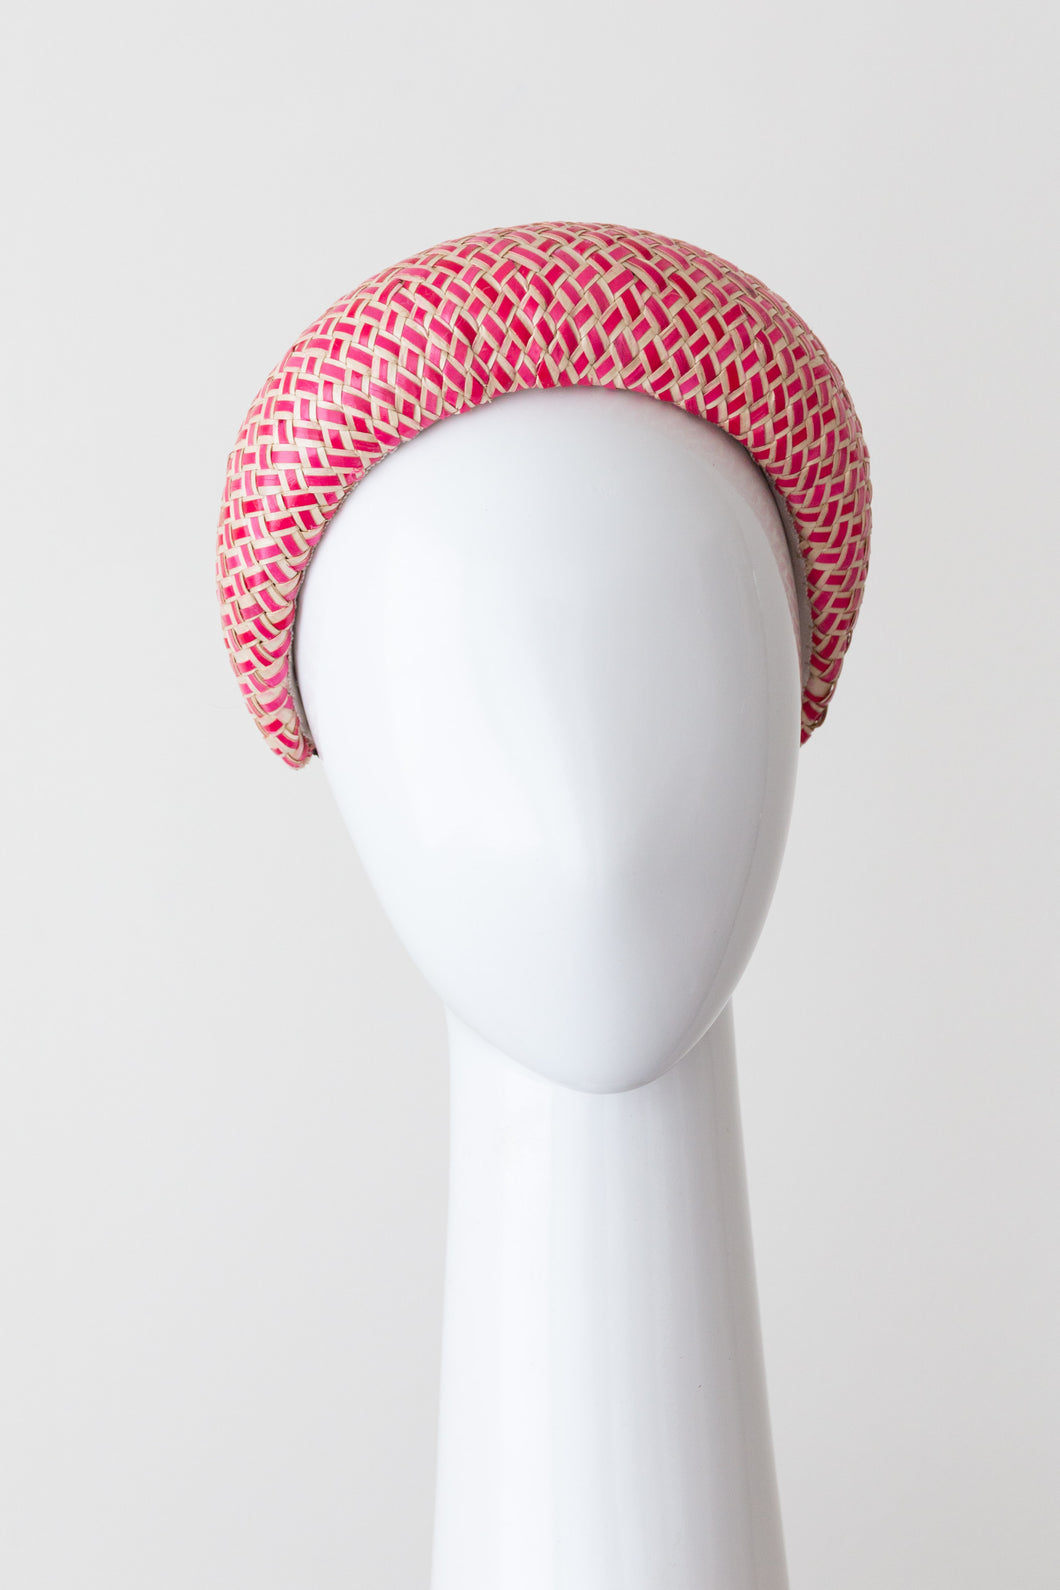 Hot Pink Headband by Felicity Northeast Millinery